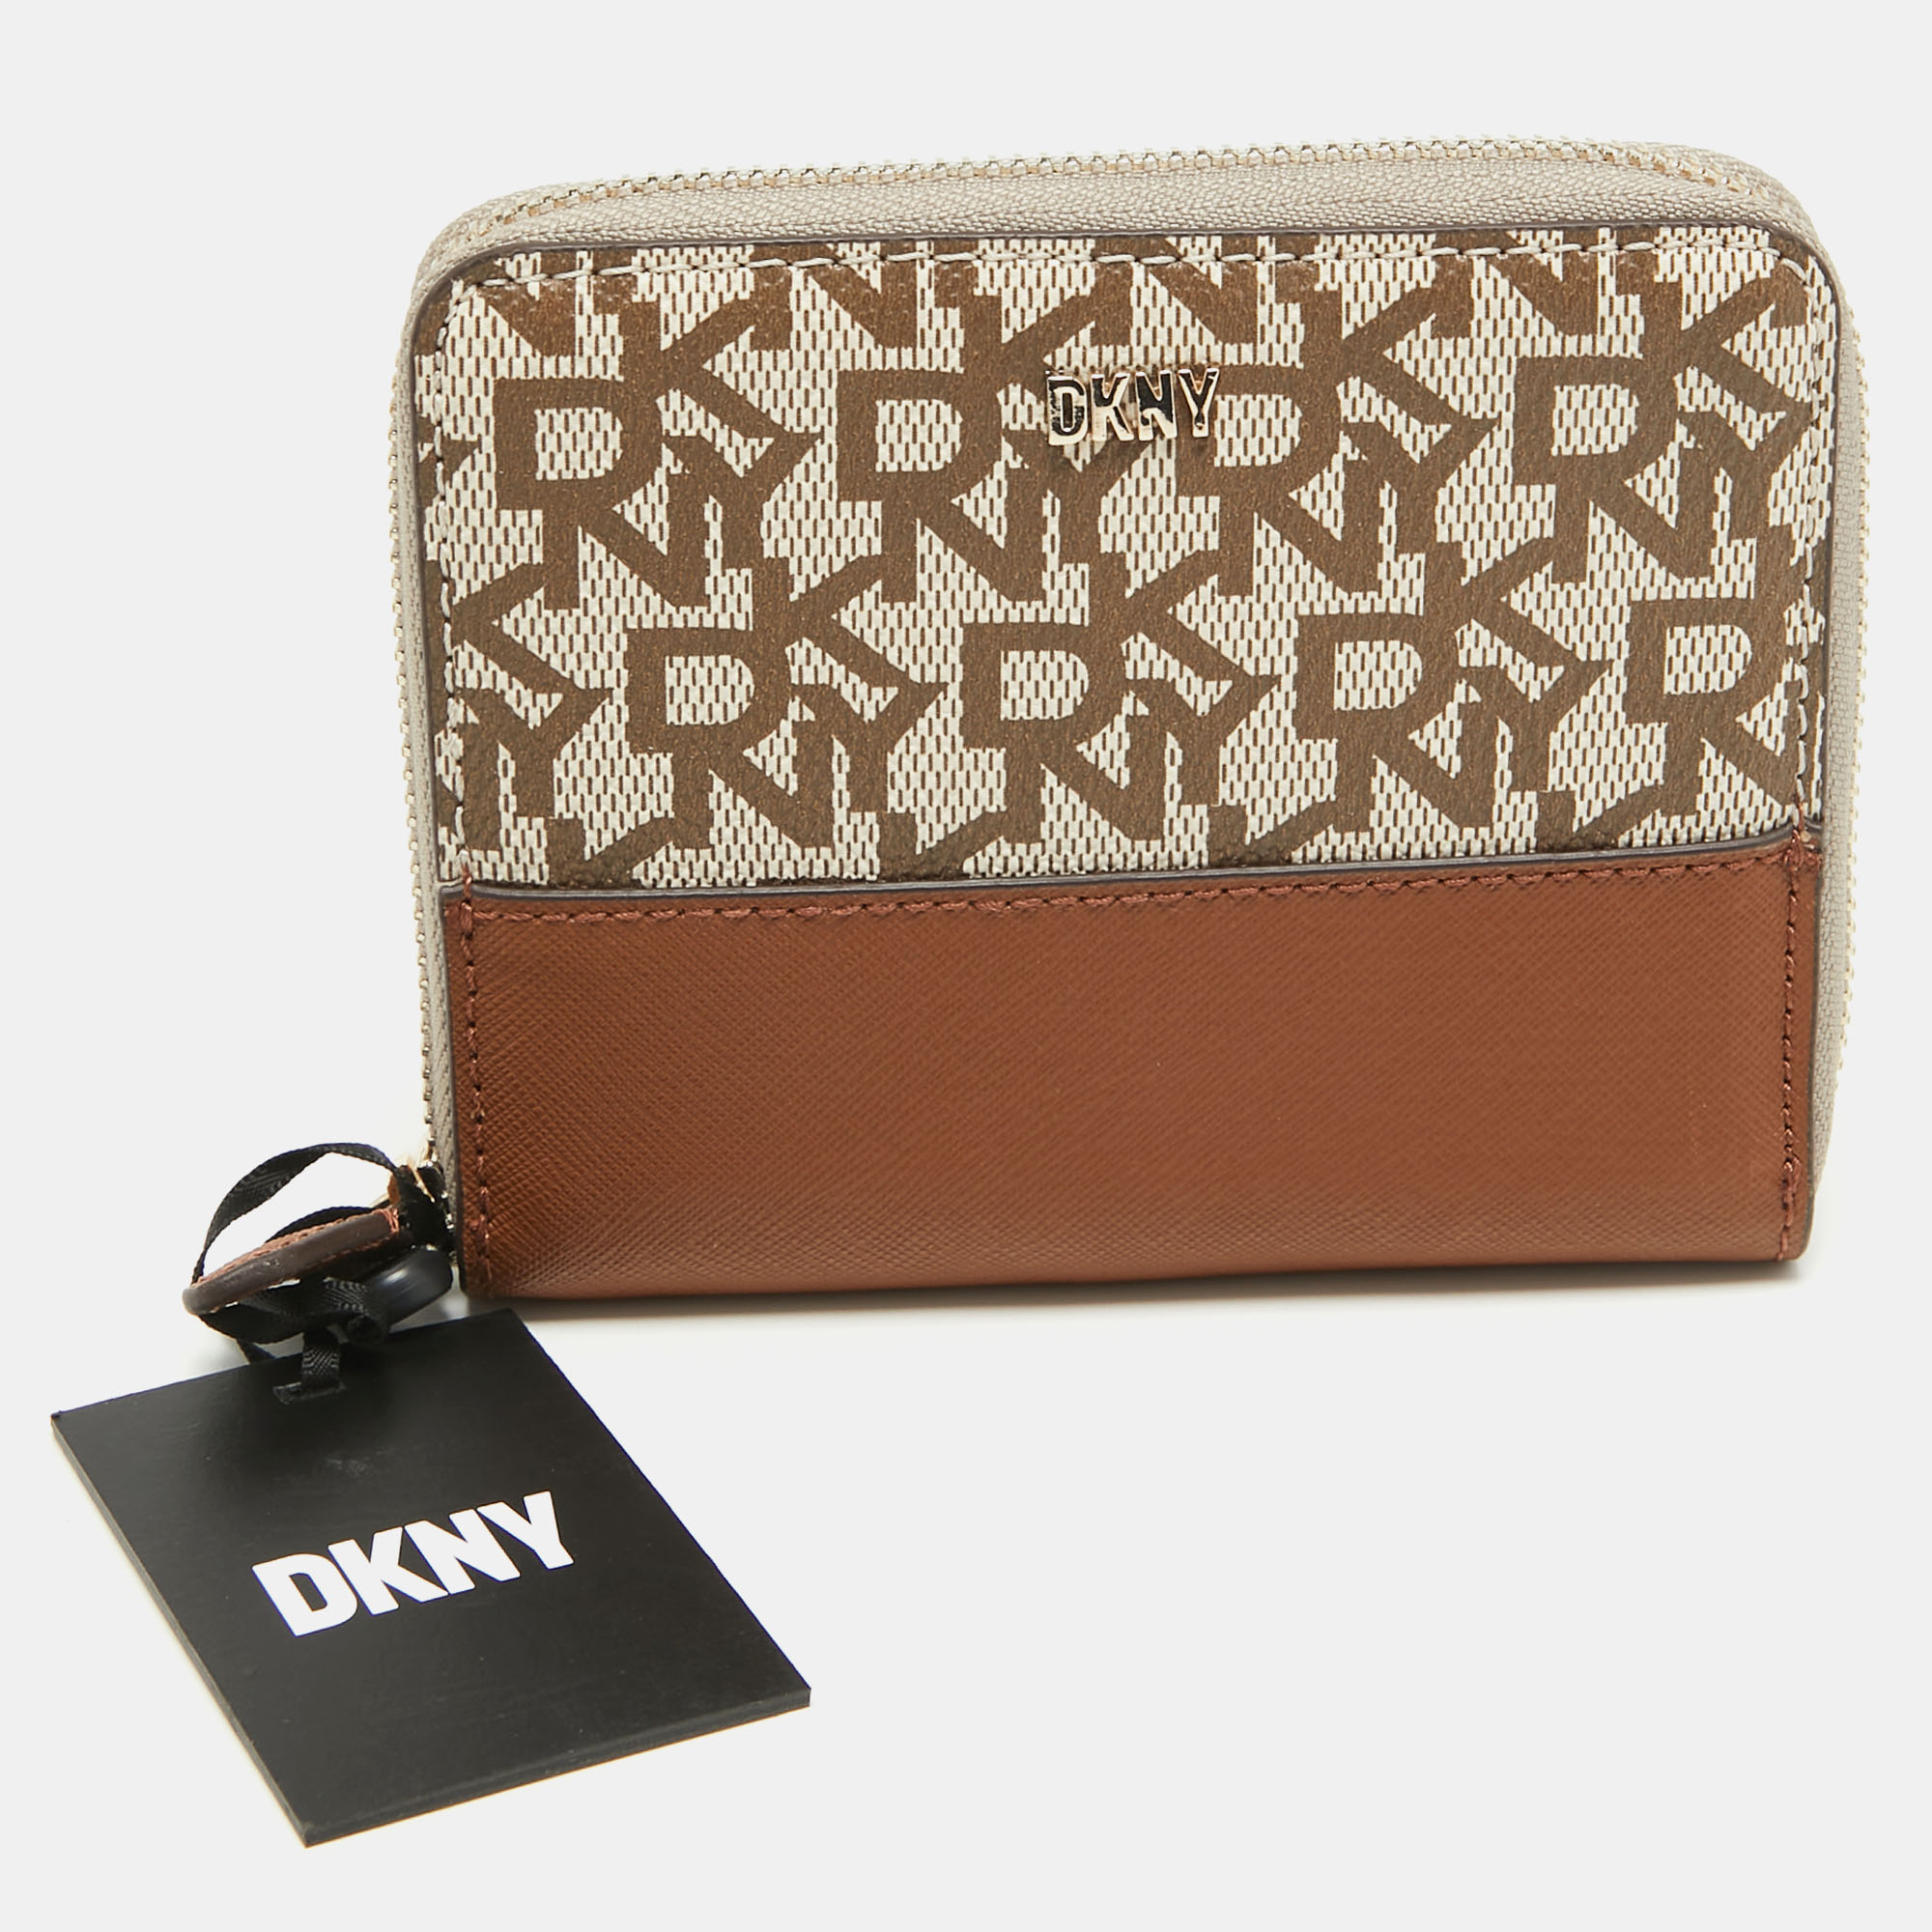 Dkny biege/brown signature coated canvas and leather vela zip around wallet